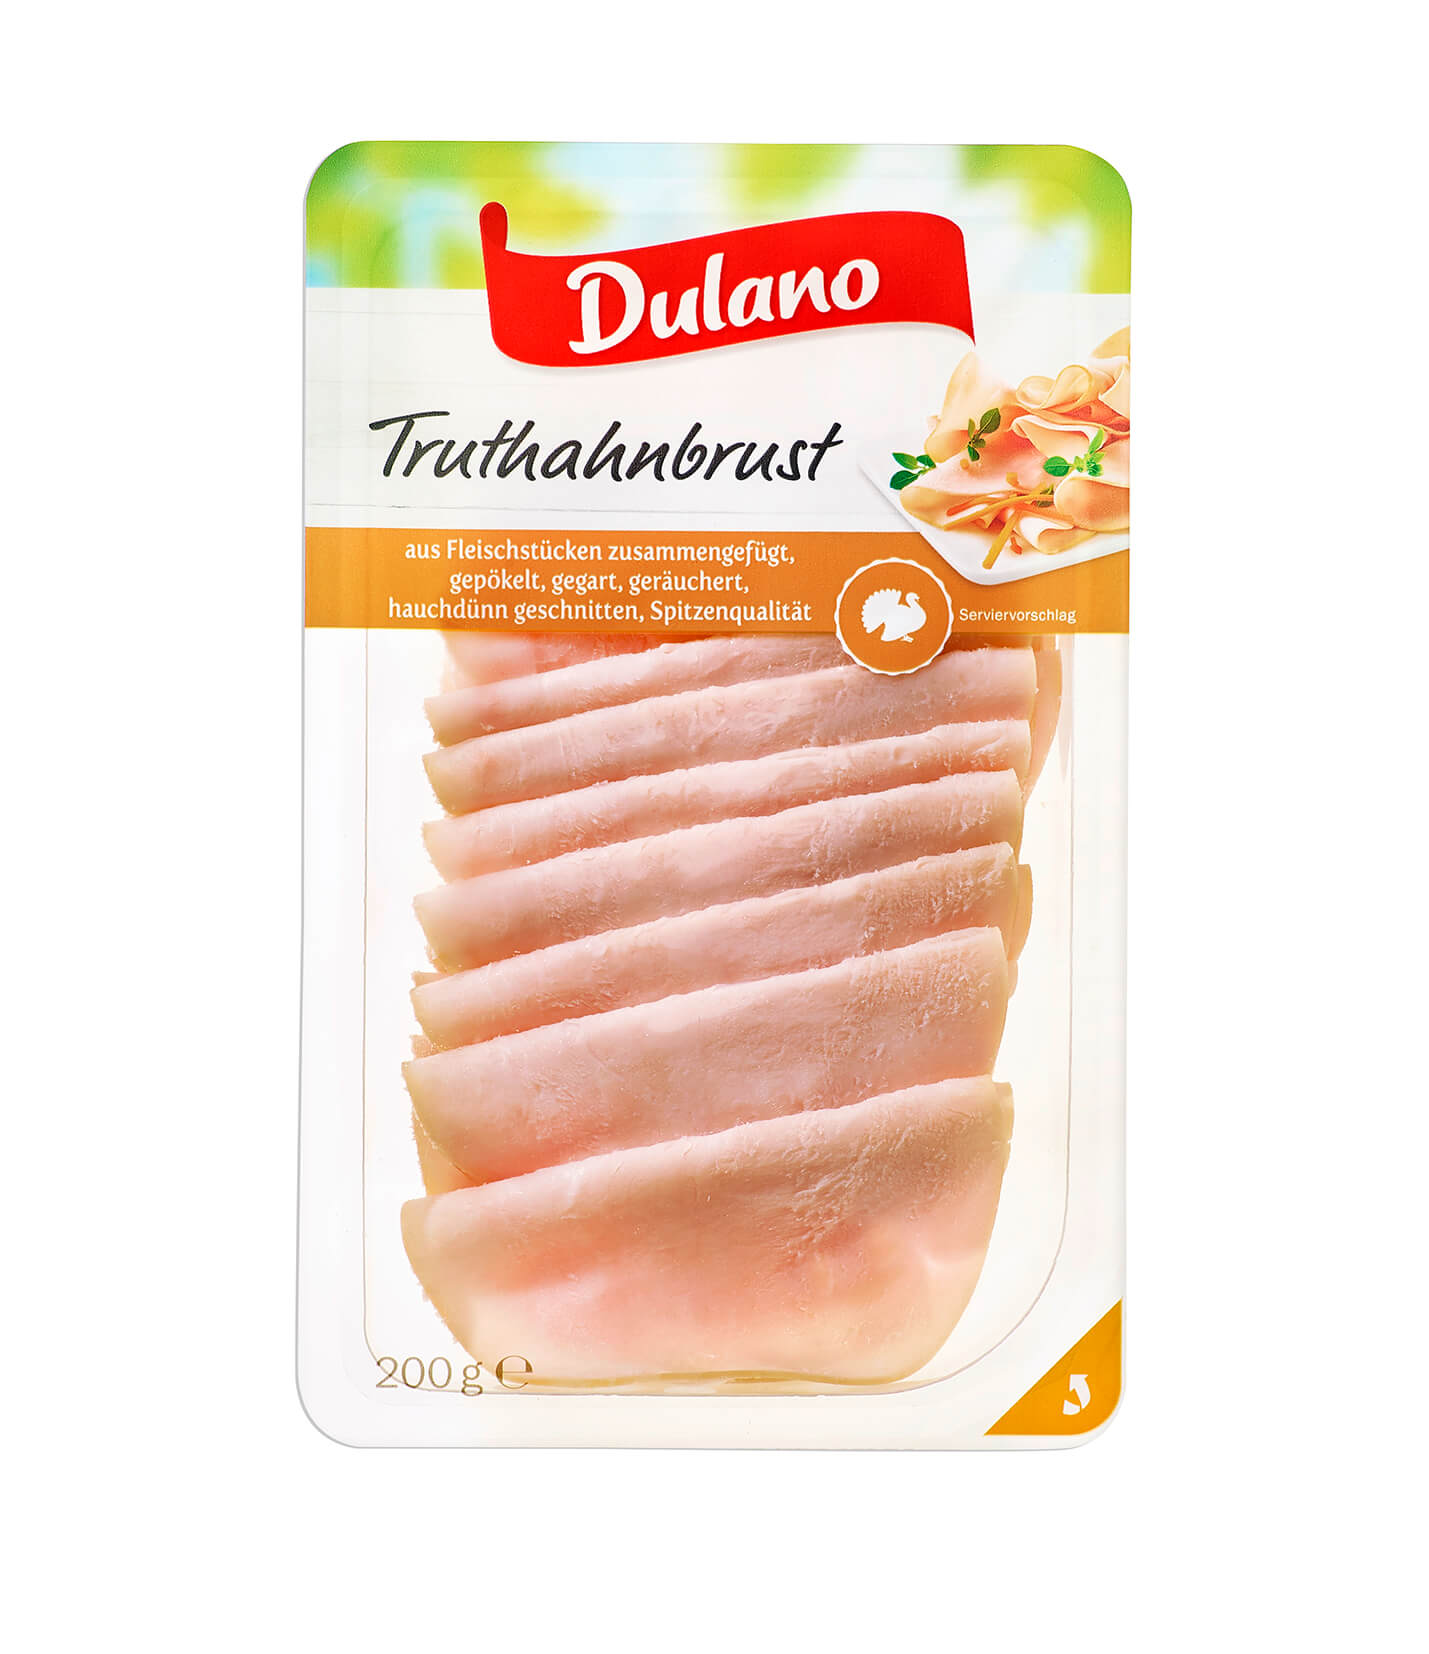 Dulano (Lidl) GmbH - / Tobacco / Butchers (200 Germany grams) Prepared/Processed · Family Hauchdünnschnitt Species Beverage The Meat/Poultry - Sausages · Food Mixed Sausages Meat/Poultry/Sausages Truthahnbrust Prepared/Processed mynetfair